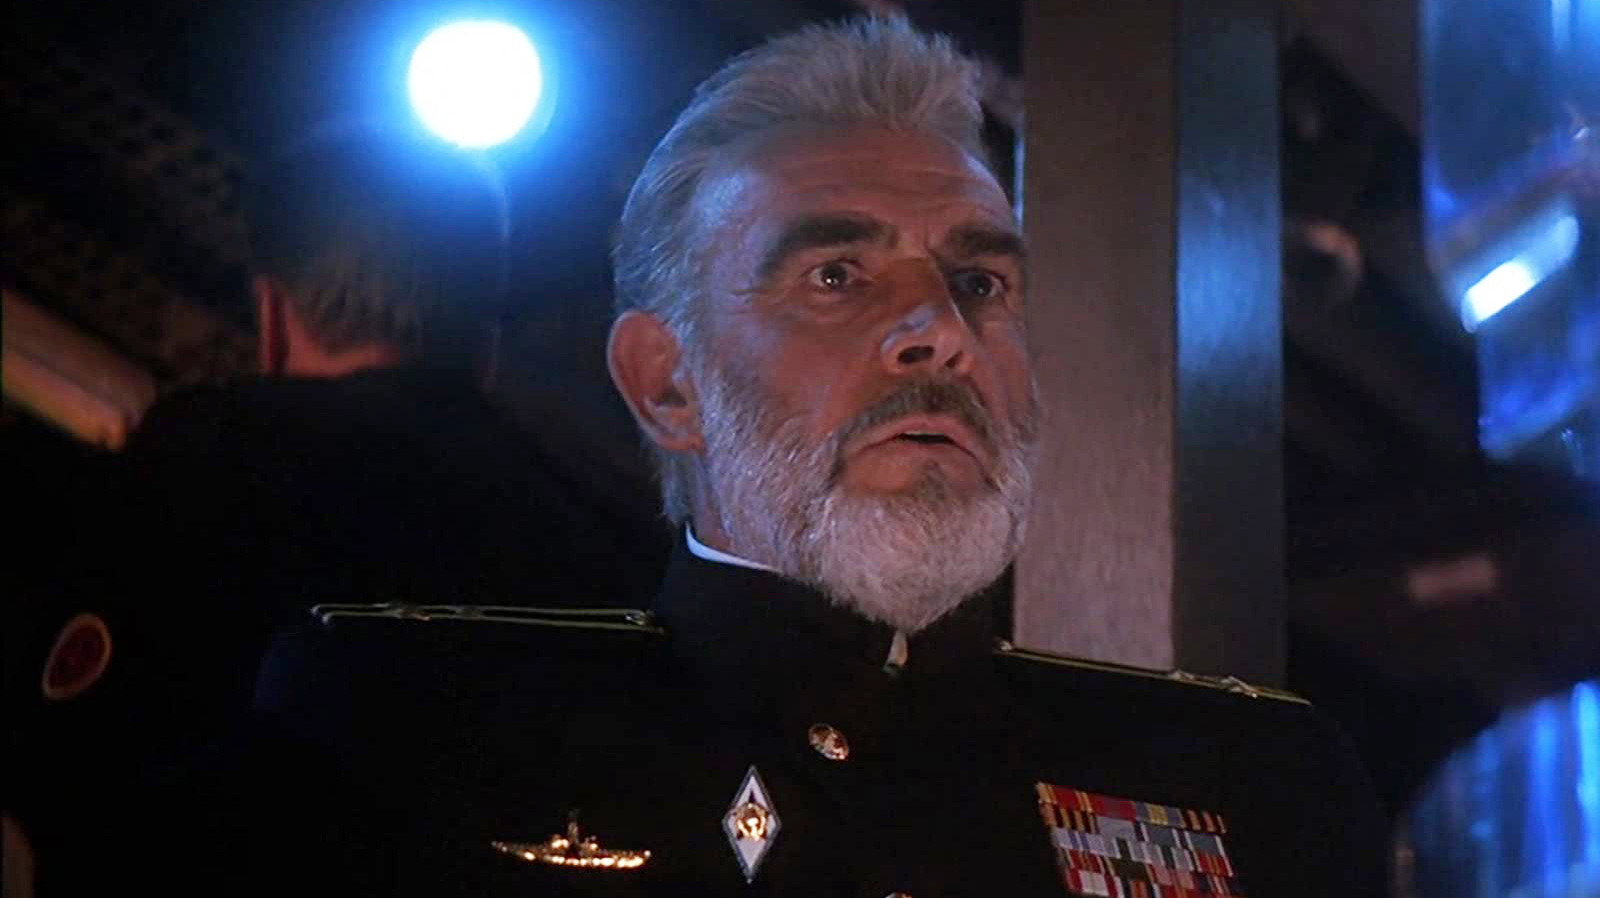 Sean Connery Completely Flipped The One Hunt For Red October